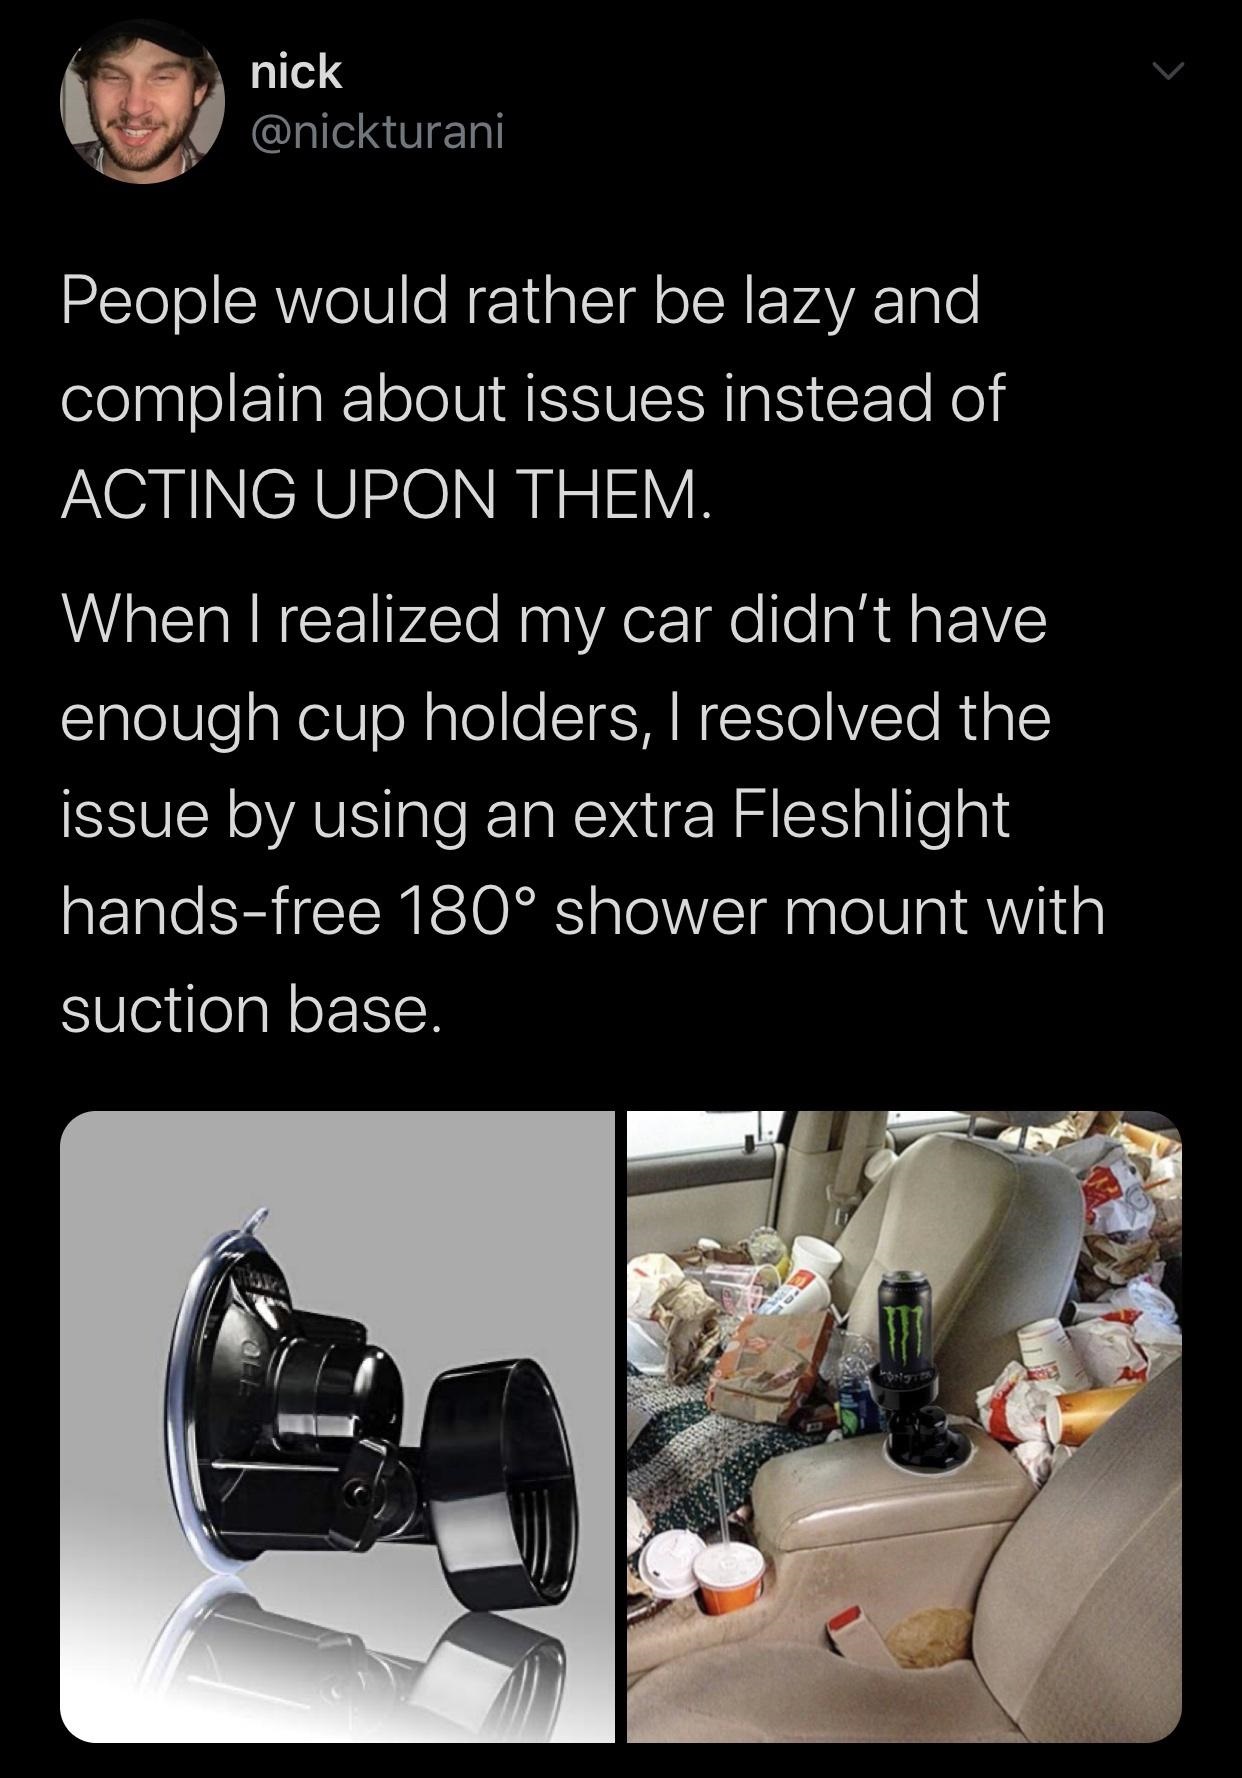 nick People would rather be lazy and complain about issues instead of Acting Upon Them. When I realized my car didn't have enough cup holders, I resolved the issue by using an extra Fleshlight handsfree 180 shower mount with suction base.